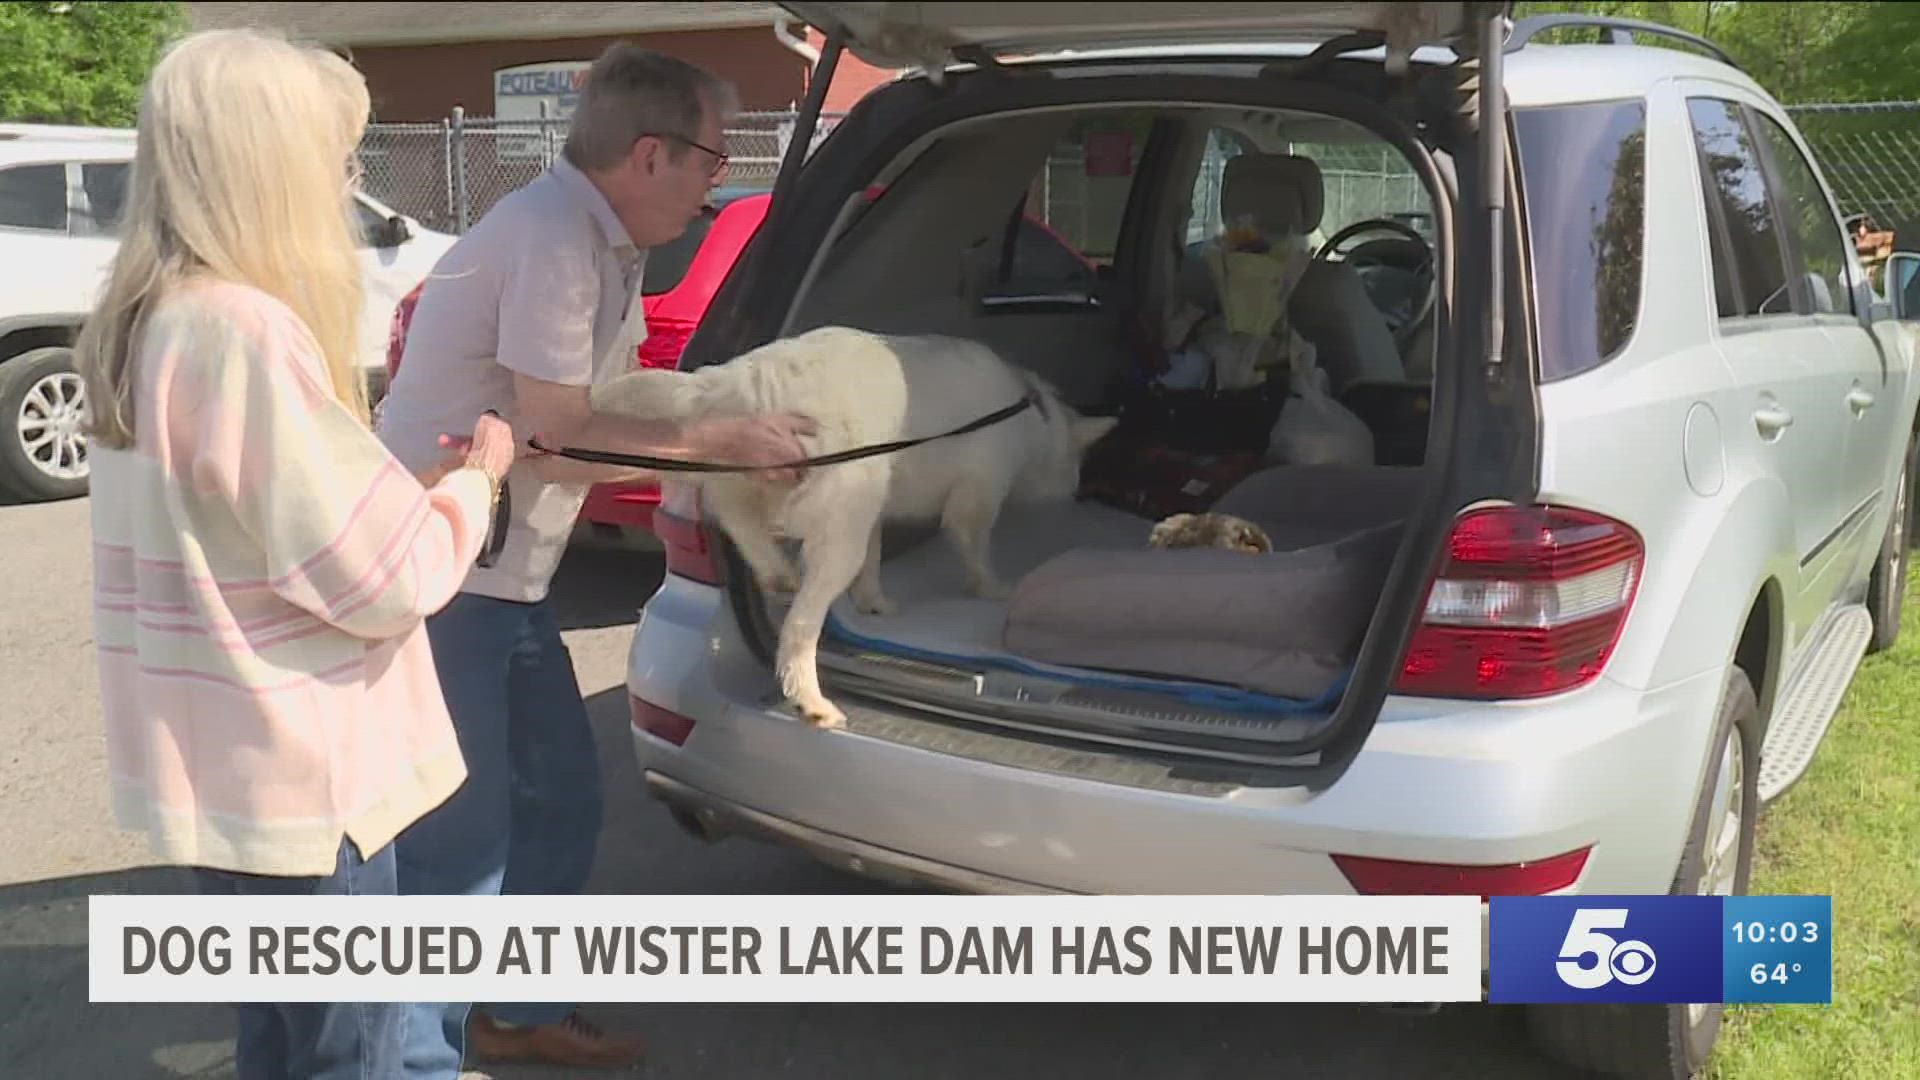 The dog left abandoned at the Lake Wister Dam and rescued by firefighters has found a new home with her new owners, who saw her story on TV.